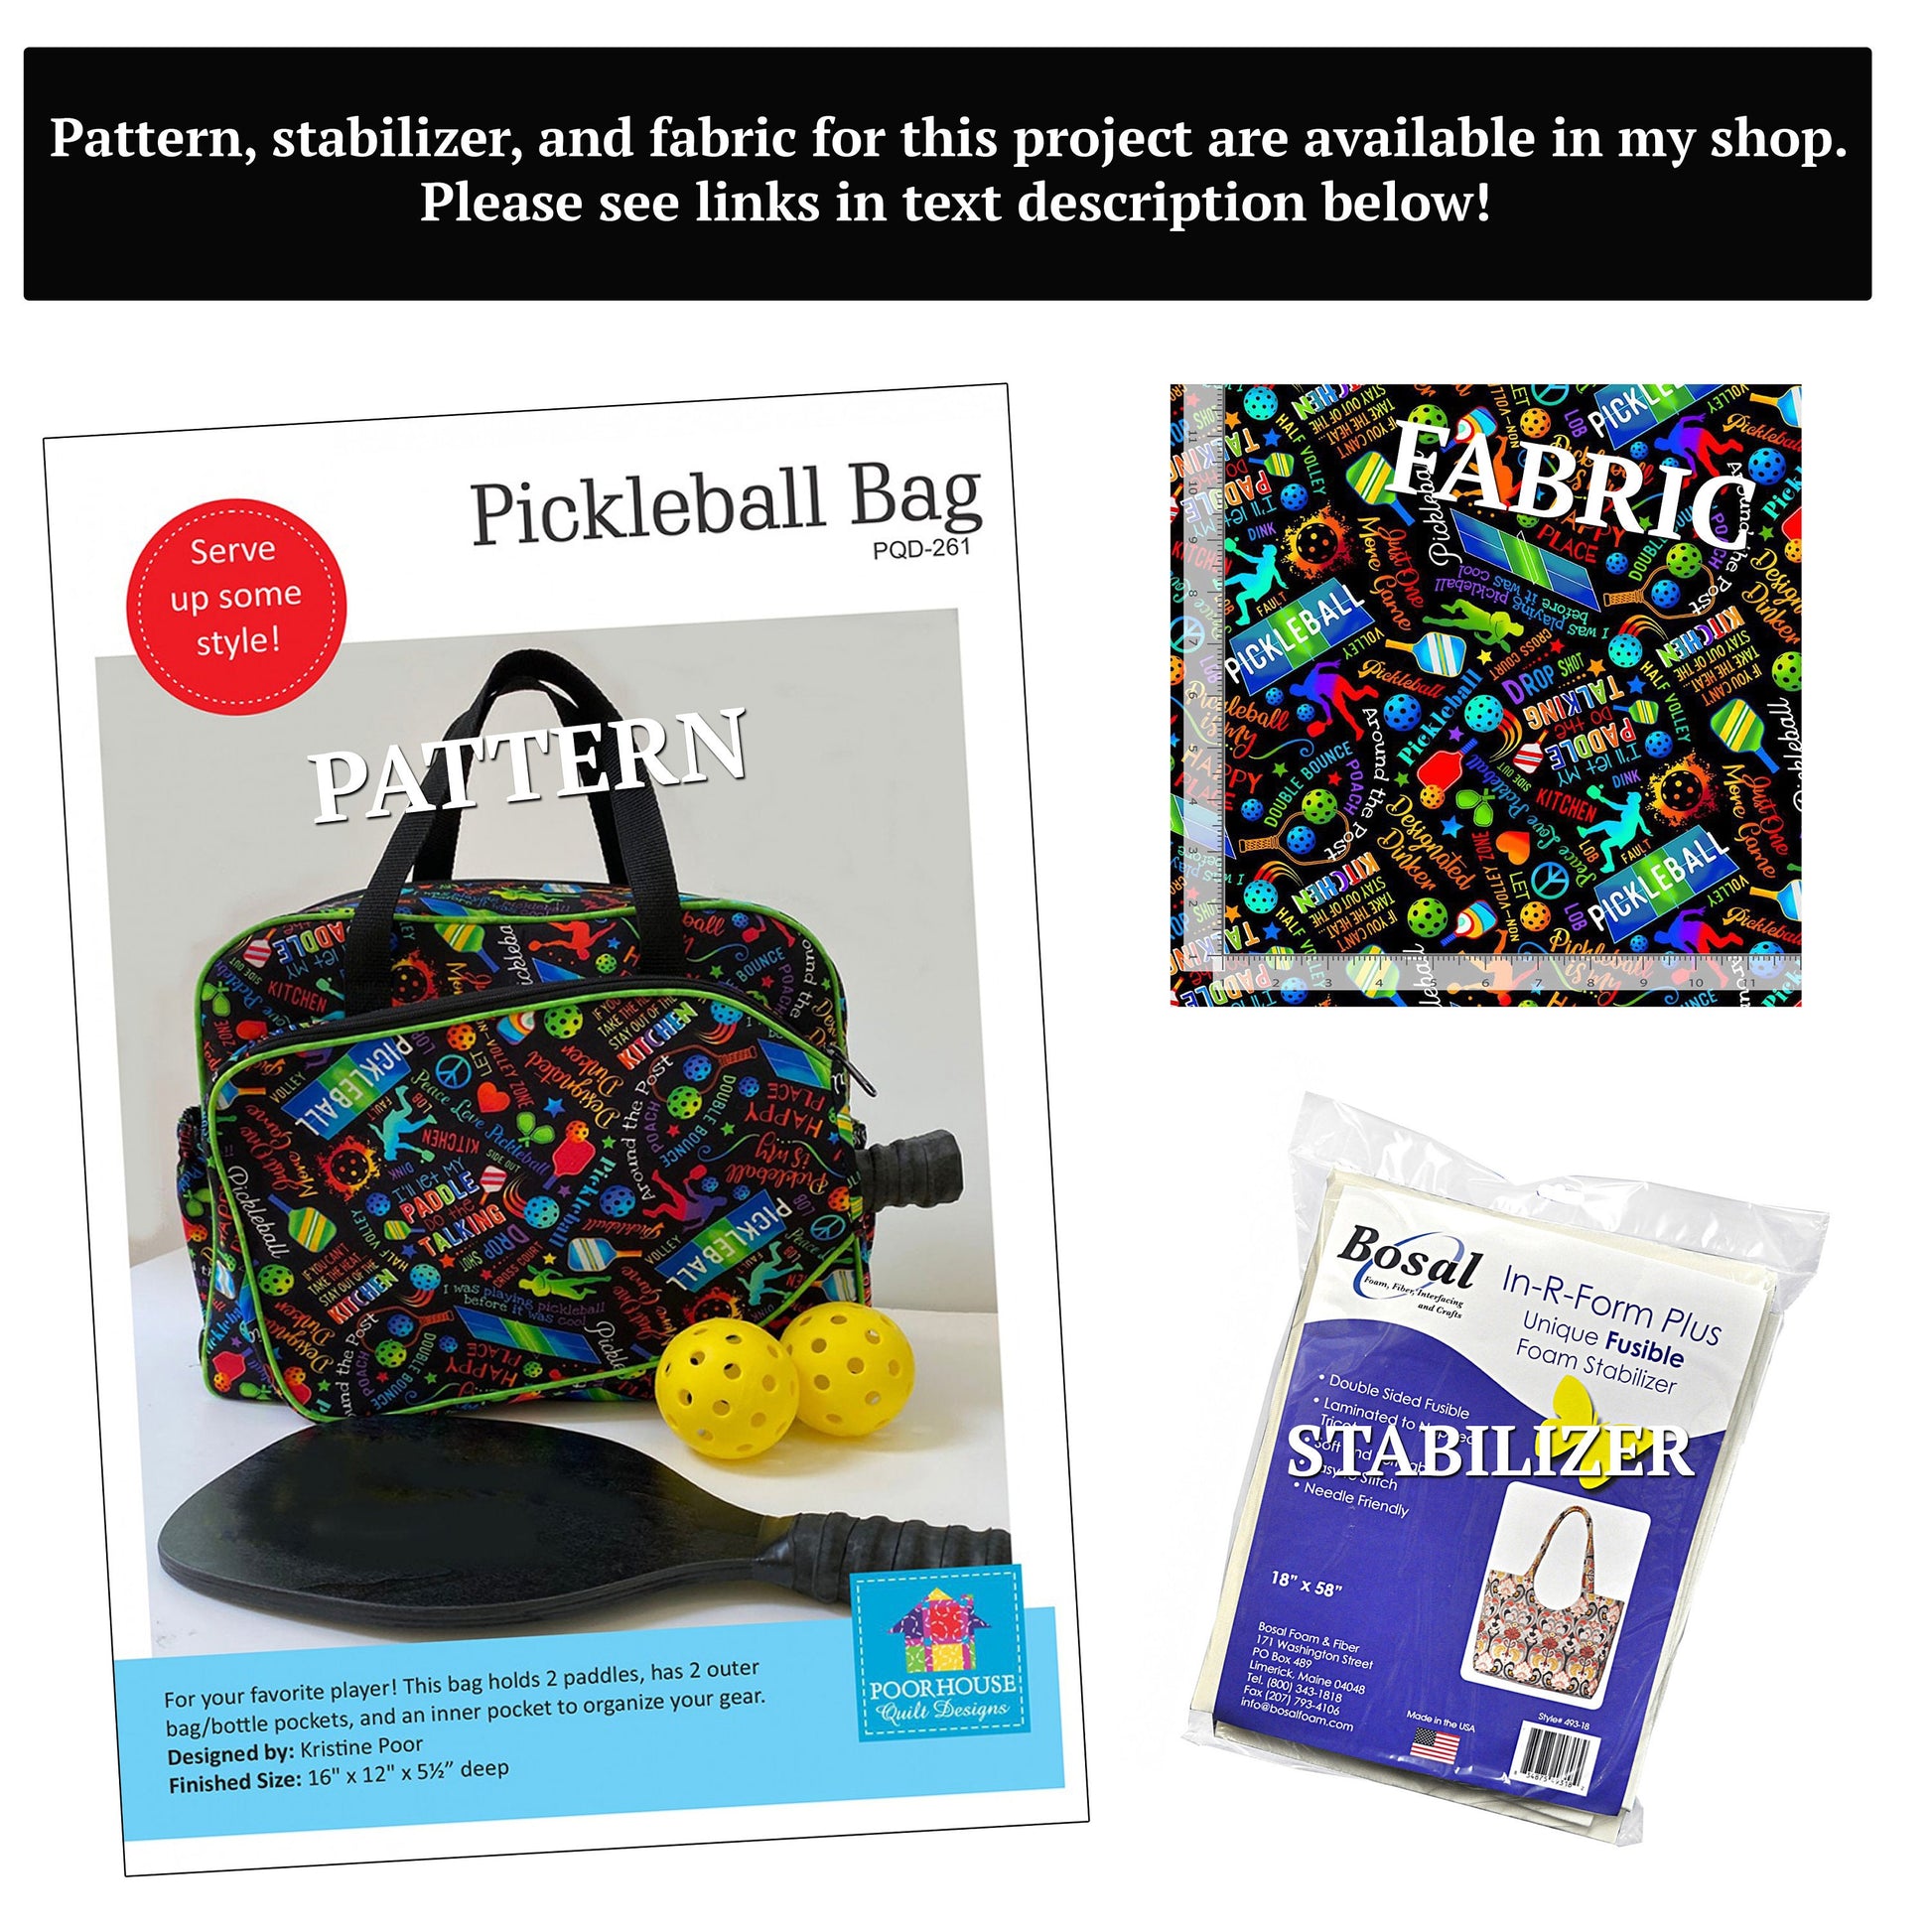 Pickleball bag sewing pattern - Physical paper pattern and instructions will be mailed to you